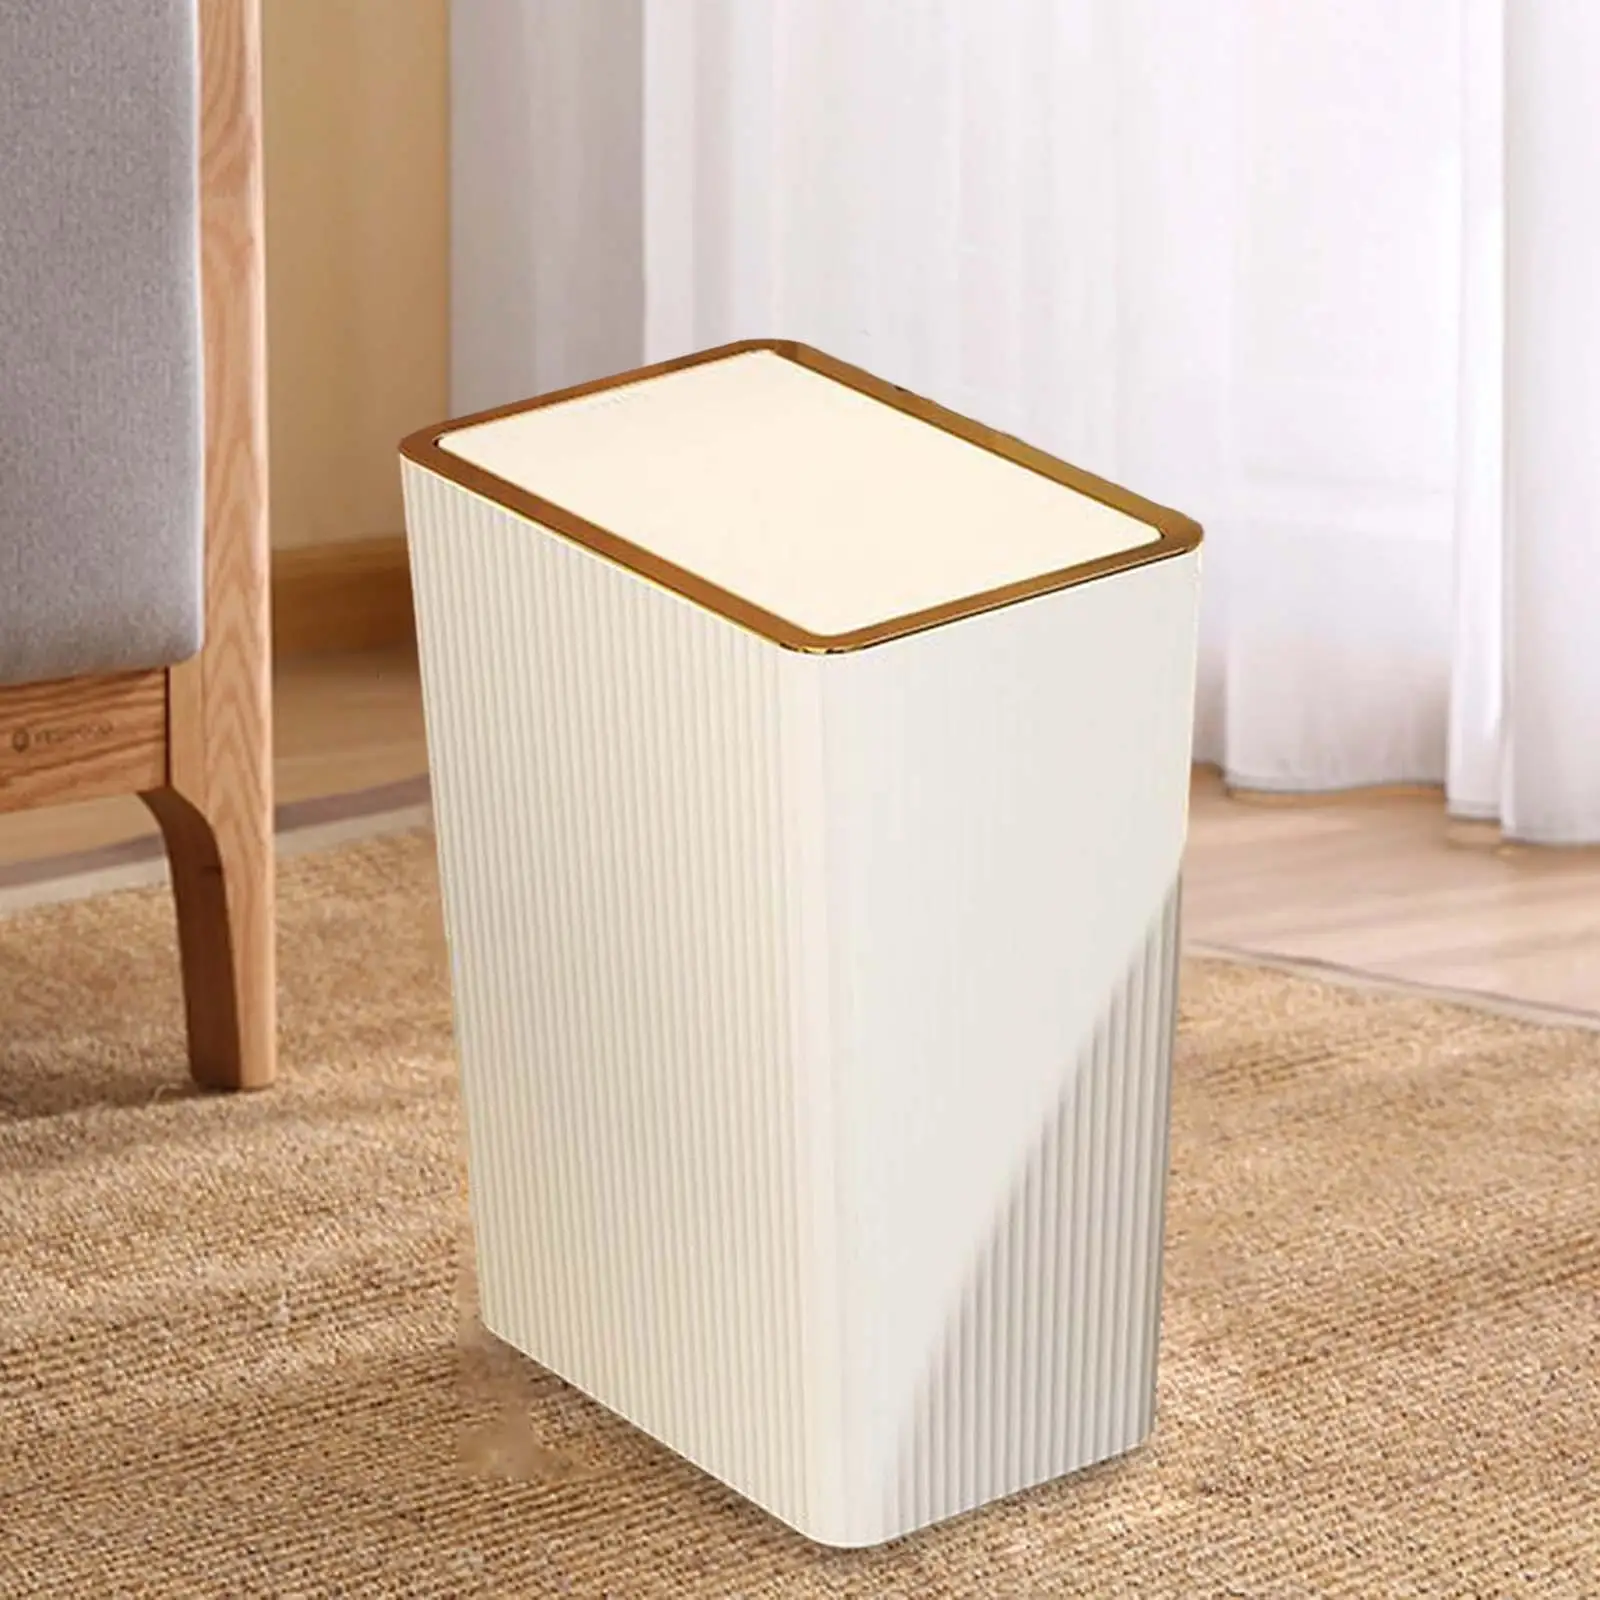 Bathroom Trash Can with Lids Slim Garbage Can for Laundry Room Bedroom Study